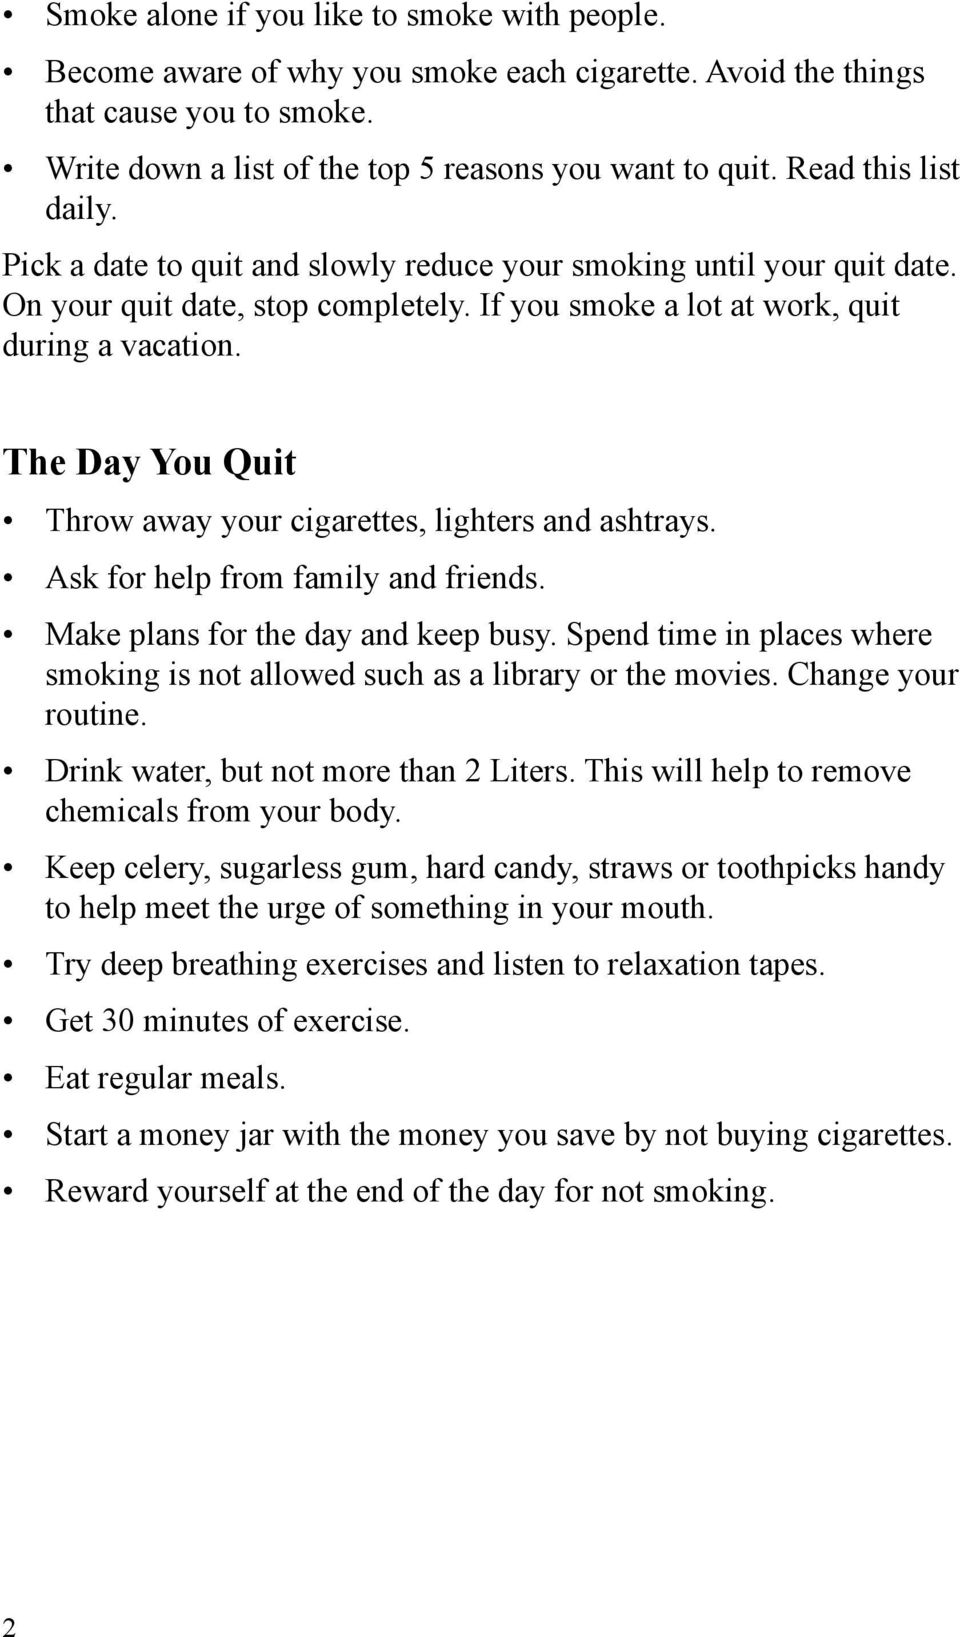 The Day You Quit Throw away your cigarettes, lighters and ashtrays. Ask for help from family and friends. Make plans for the day and keep busy.